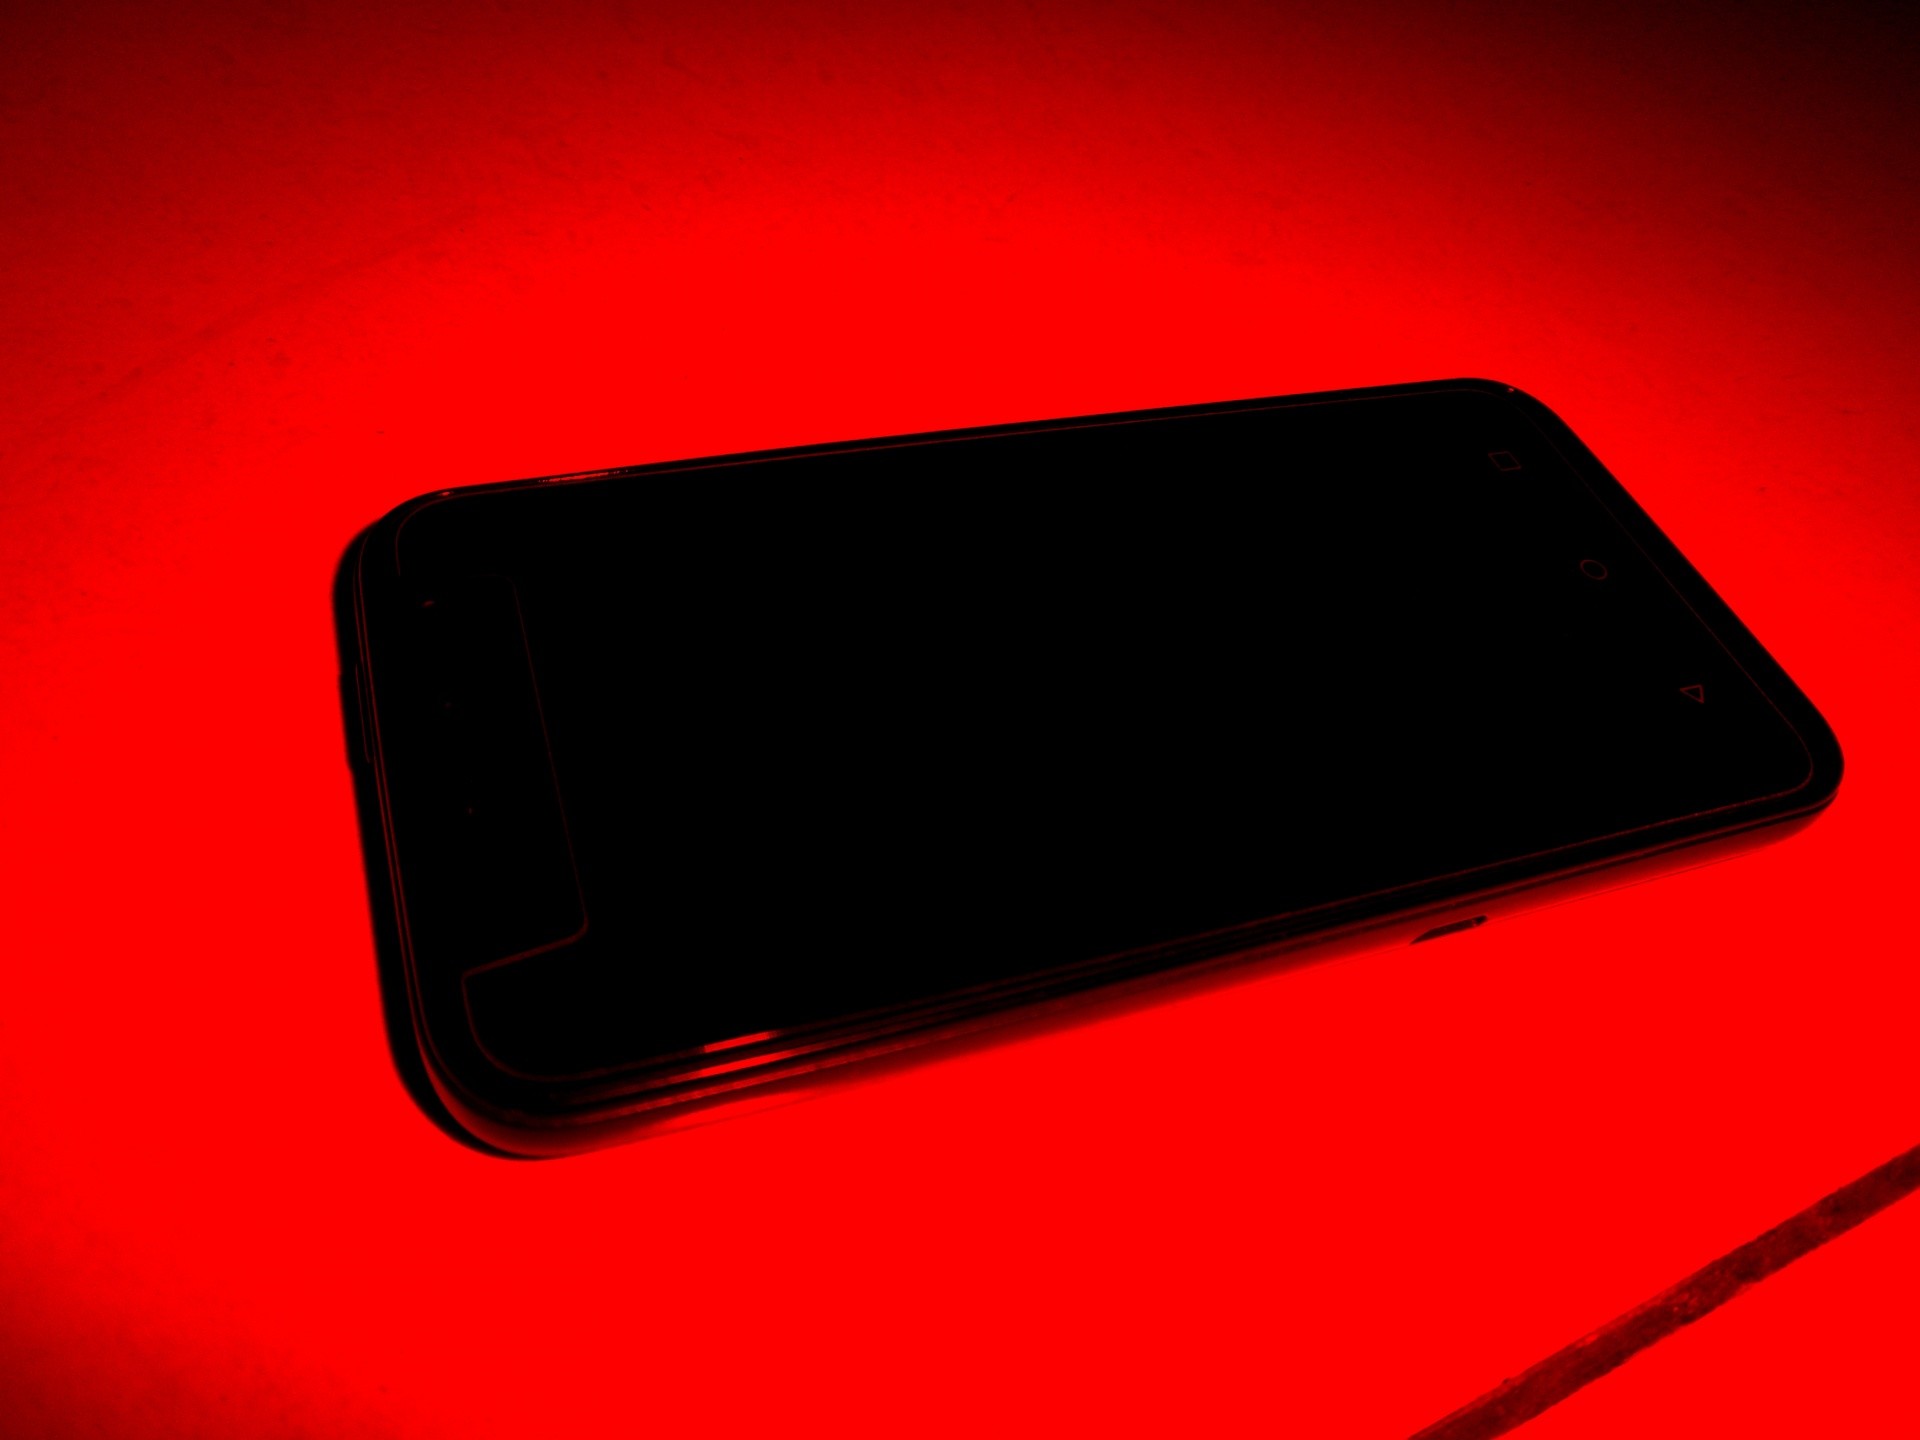 1920x1440 Cell Phone - Red Background